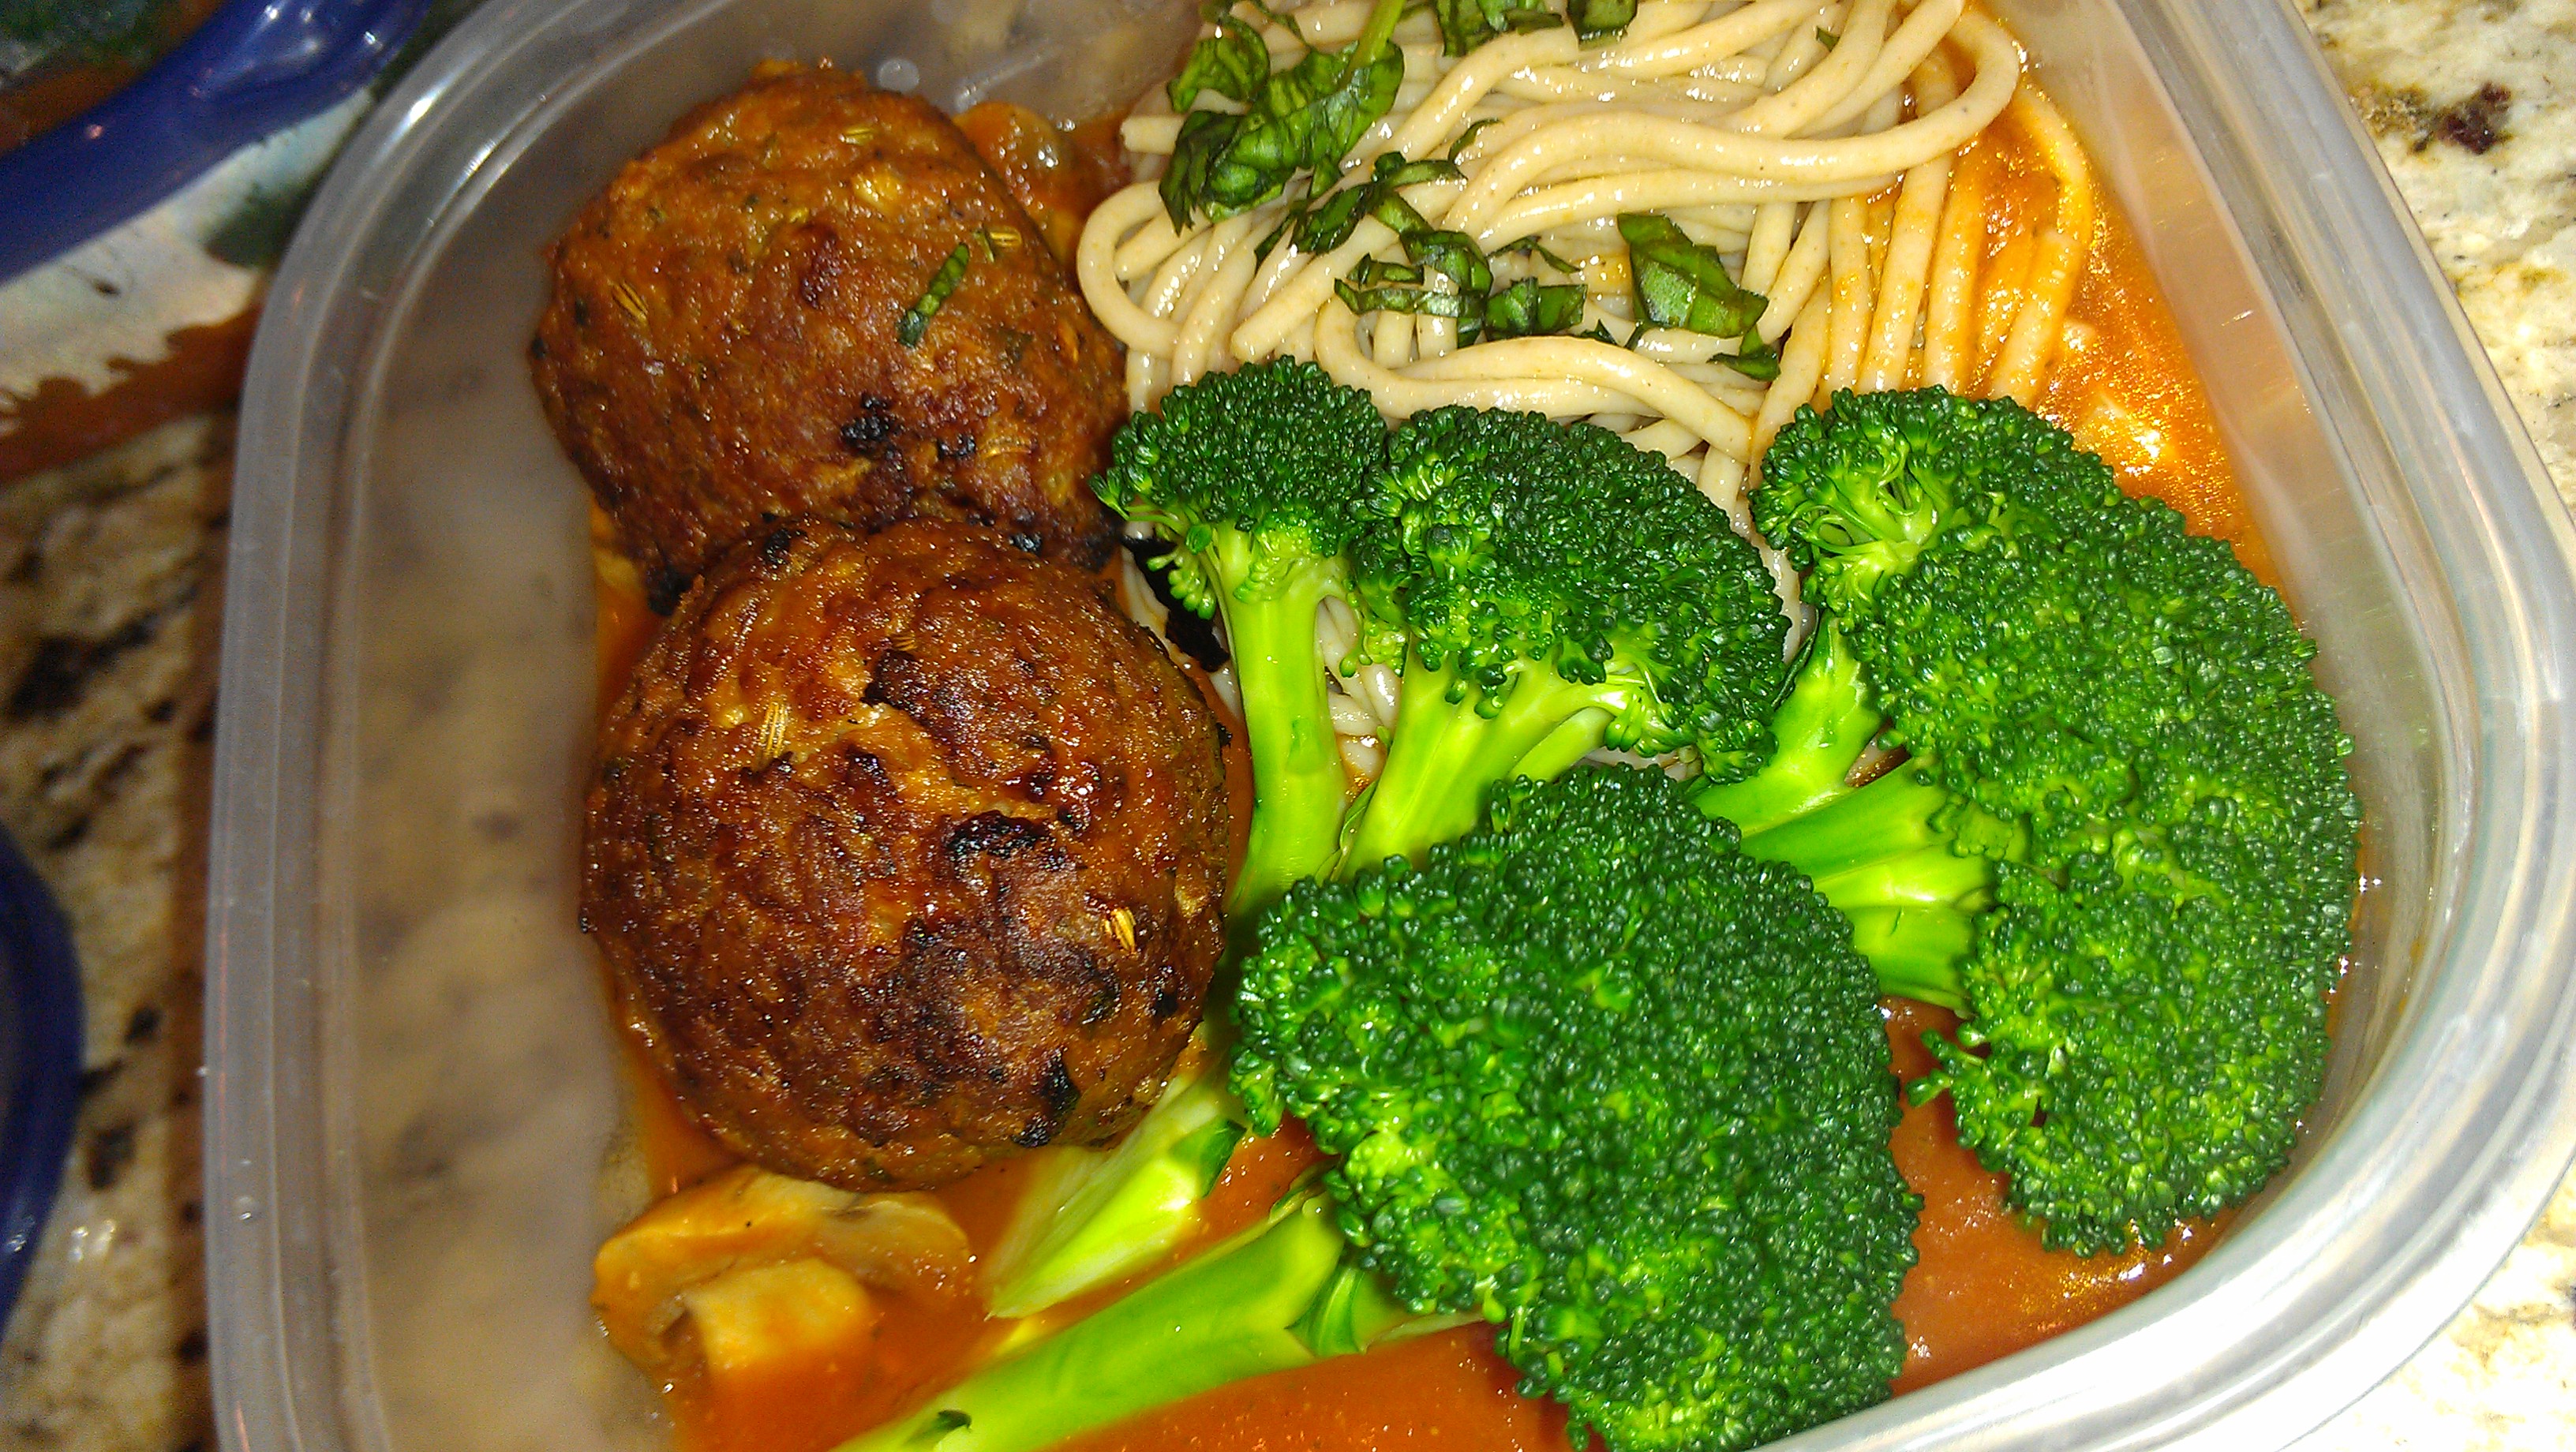 Low fat homemade meatballs pic